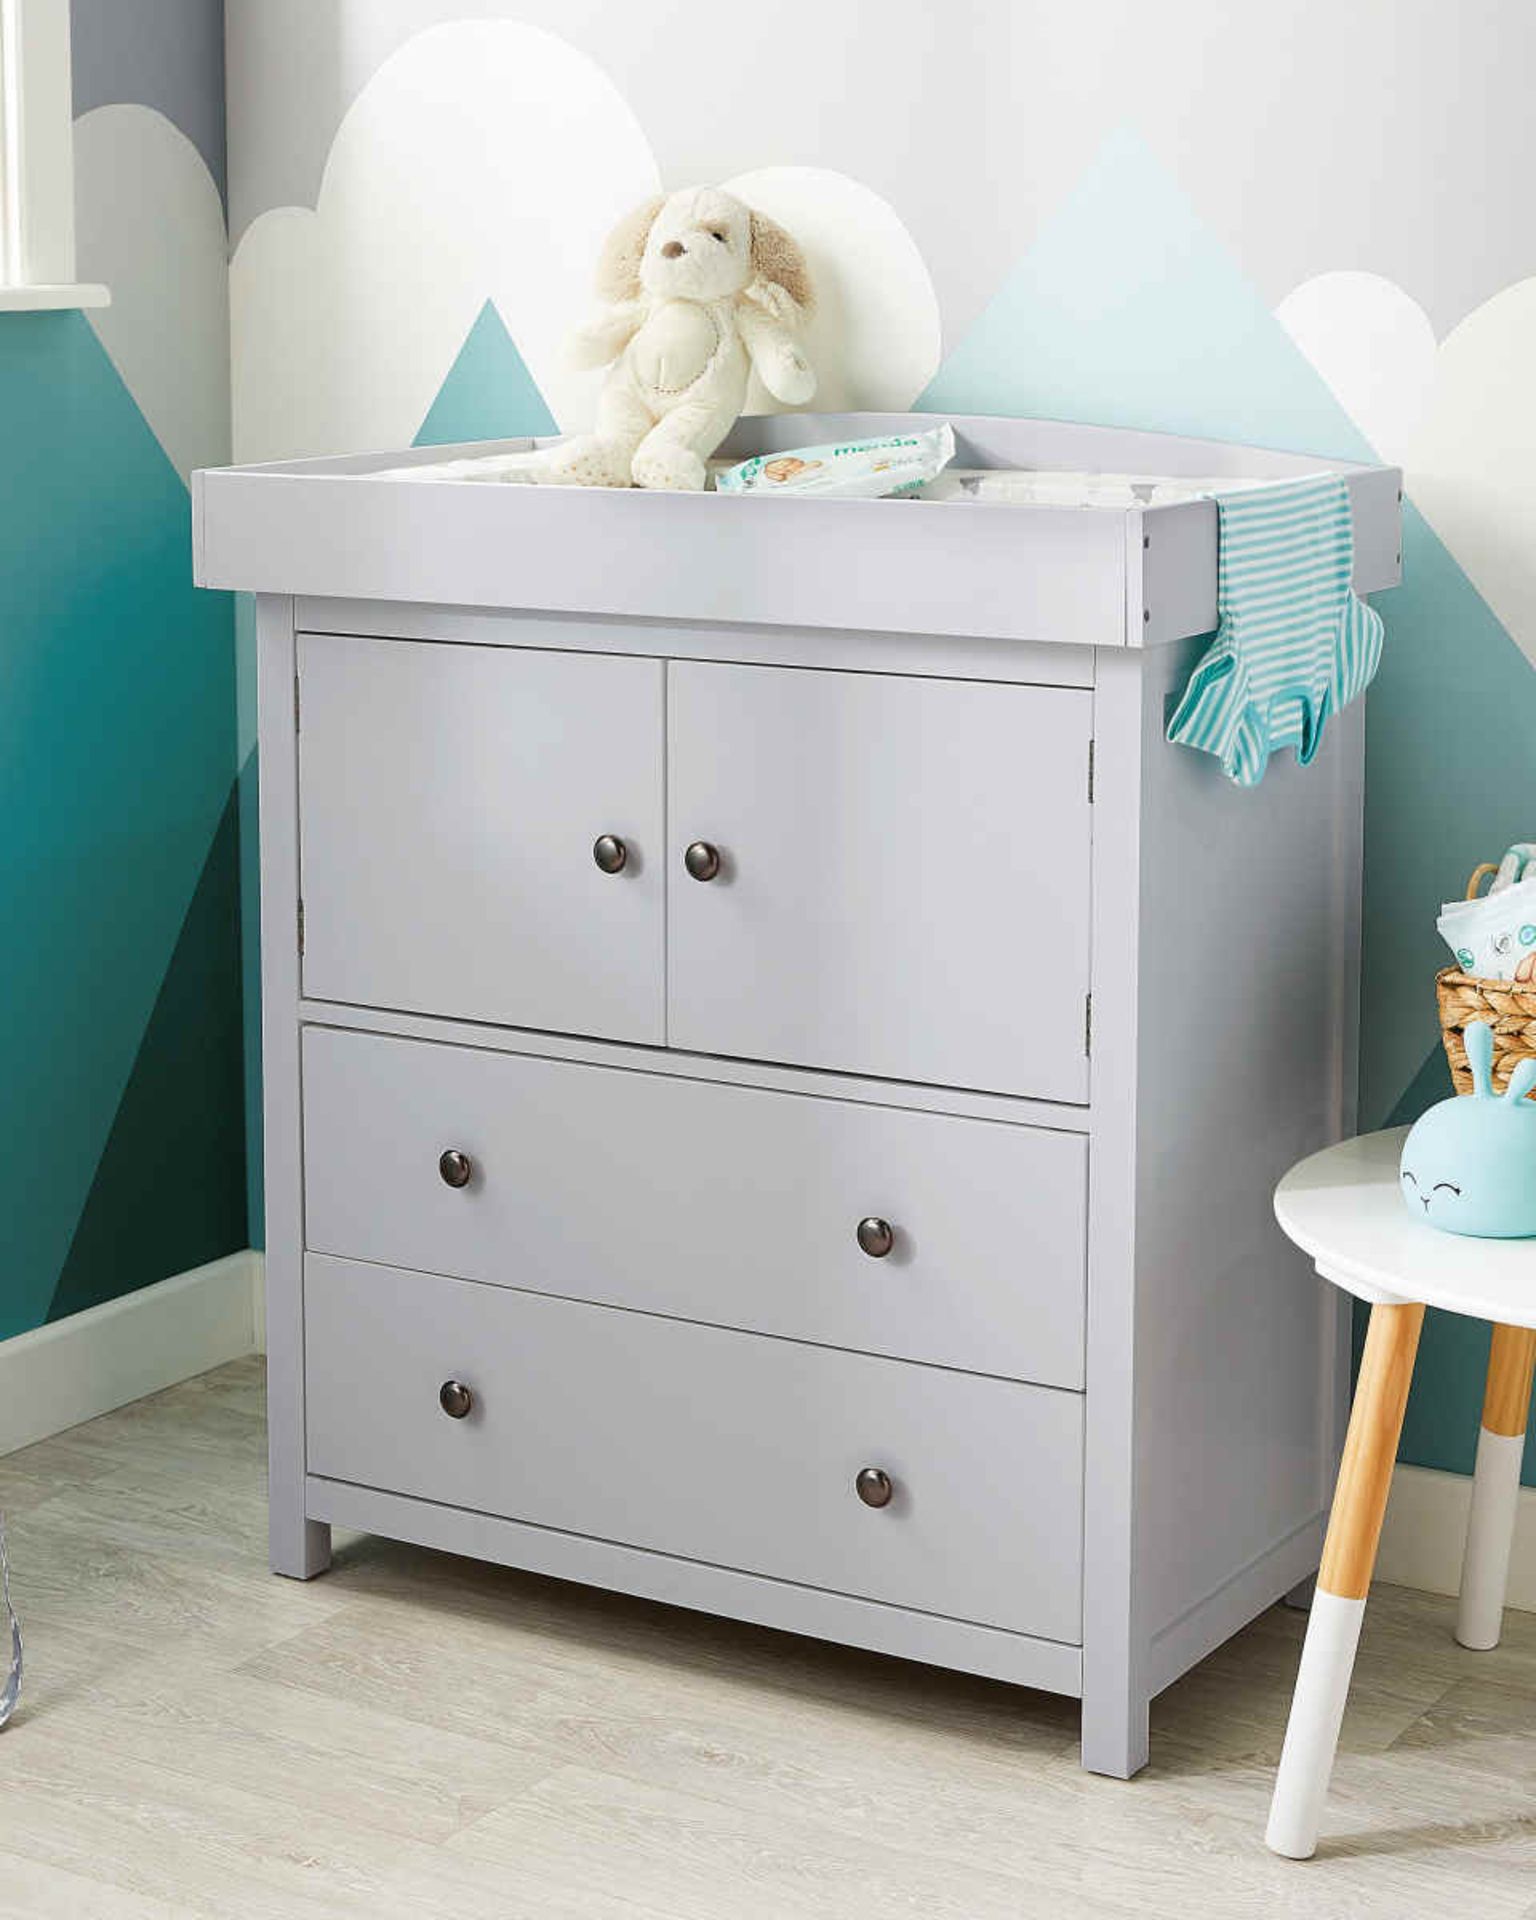 Mamia Grey Baby Changing Unit. Prepare the nursery for your new arrival with this Mamia Grey Baby